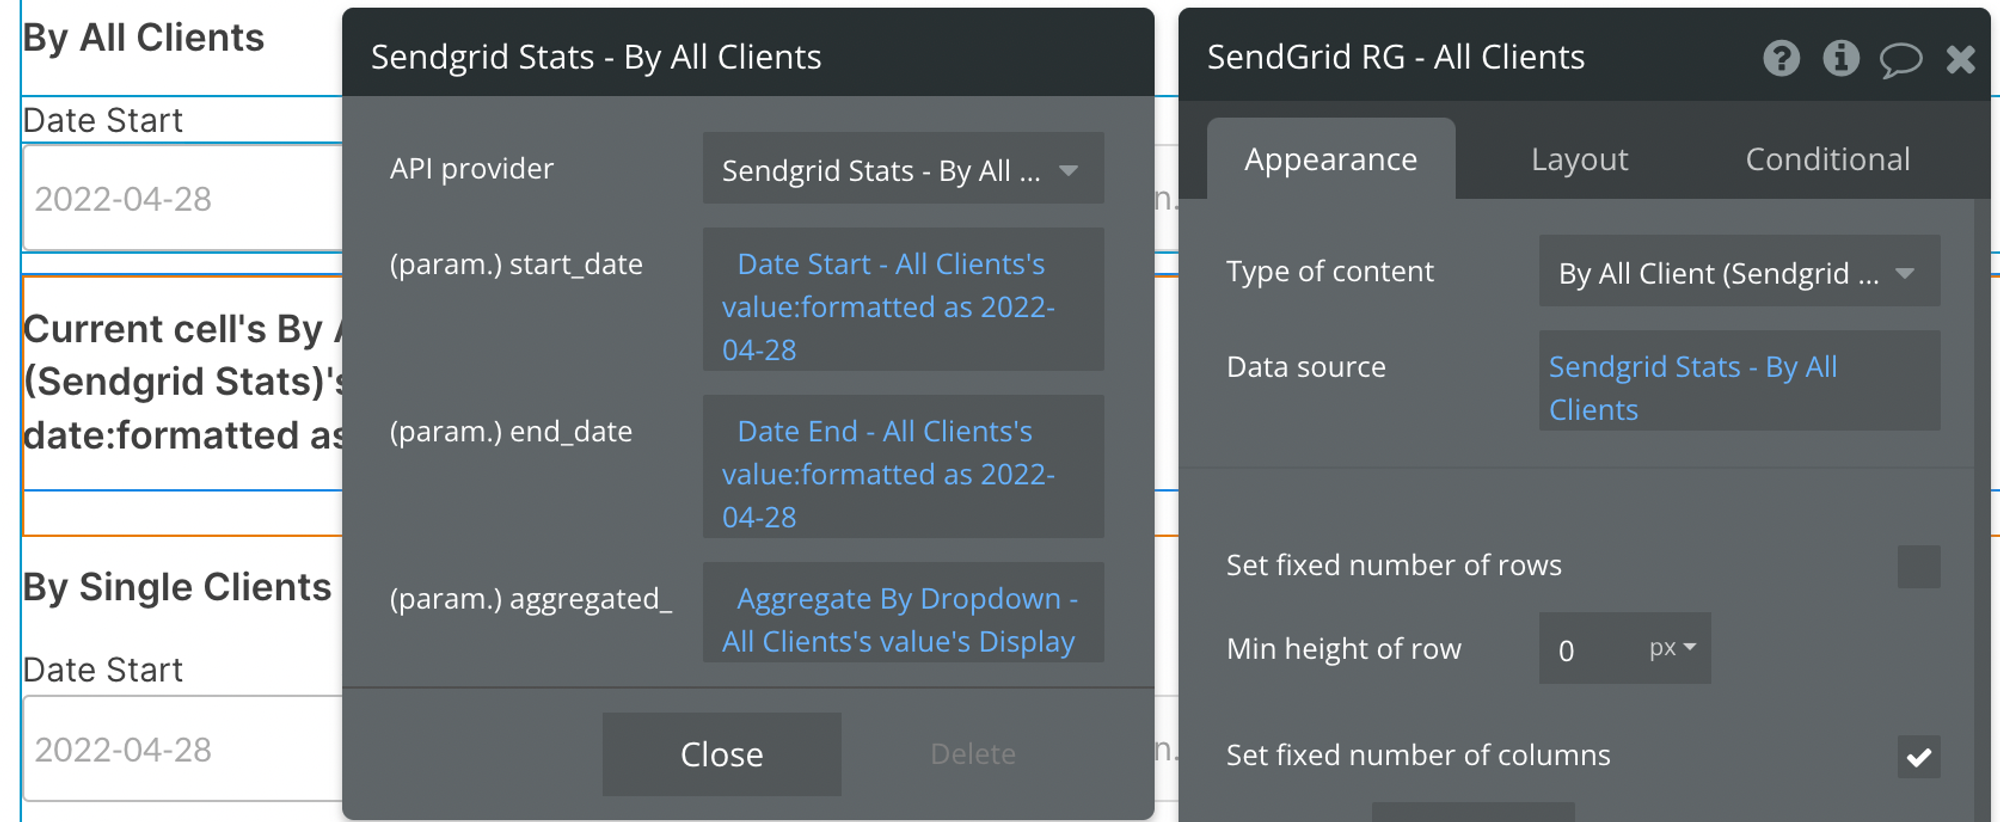 Select Sendgrid Stats - By All Clients from the API provider dropdown